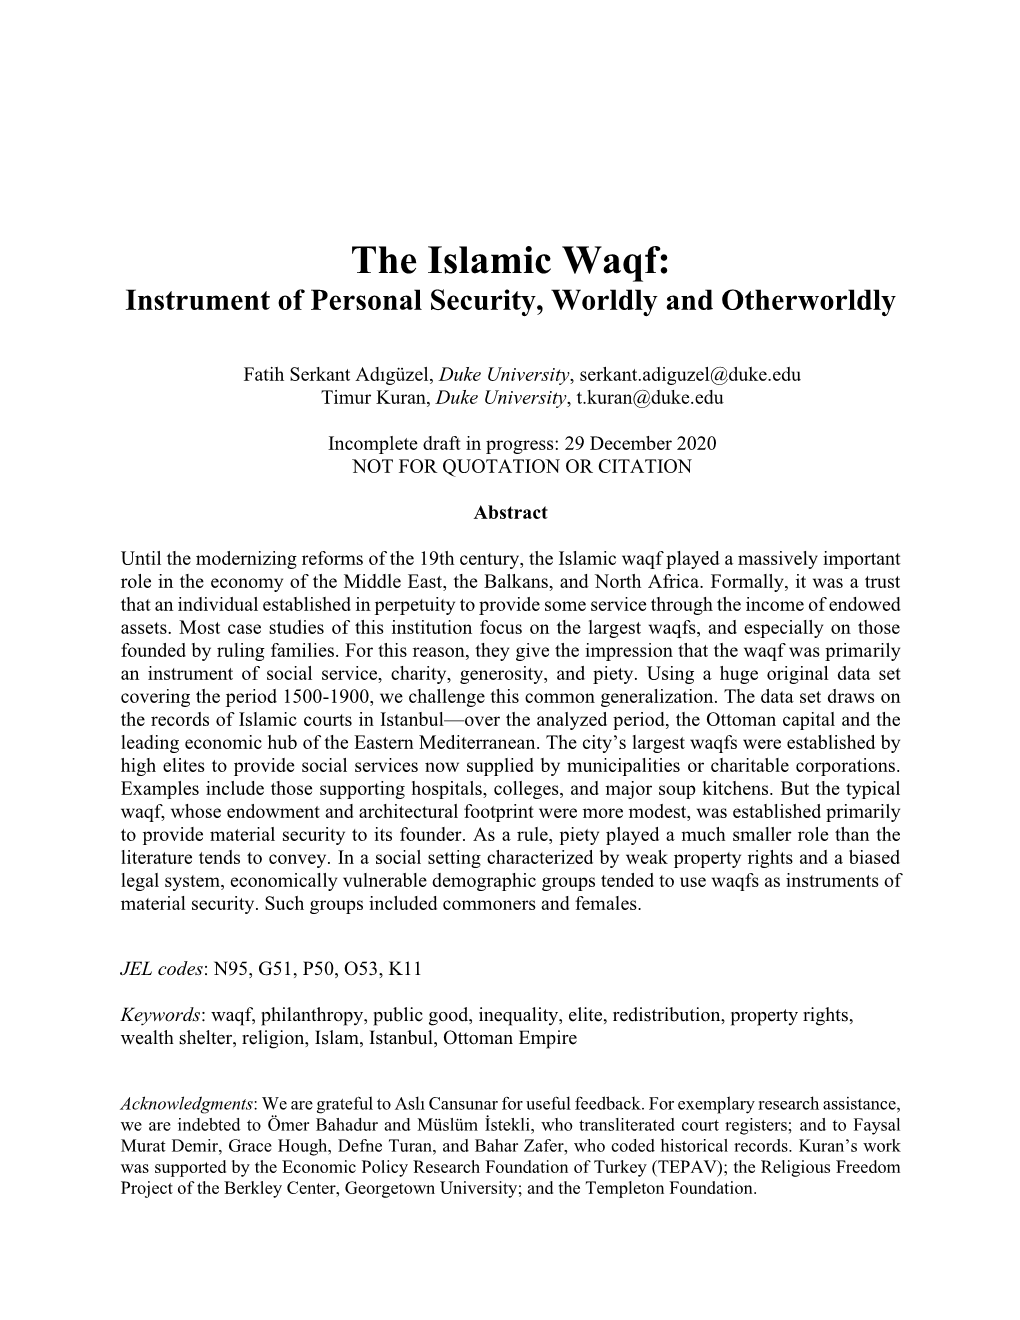 The Islamic Waqf: Instrument of Personal Security, Worldly and Otherworldly